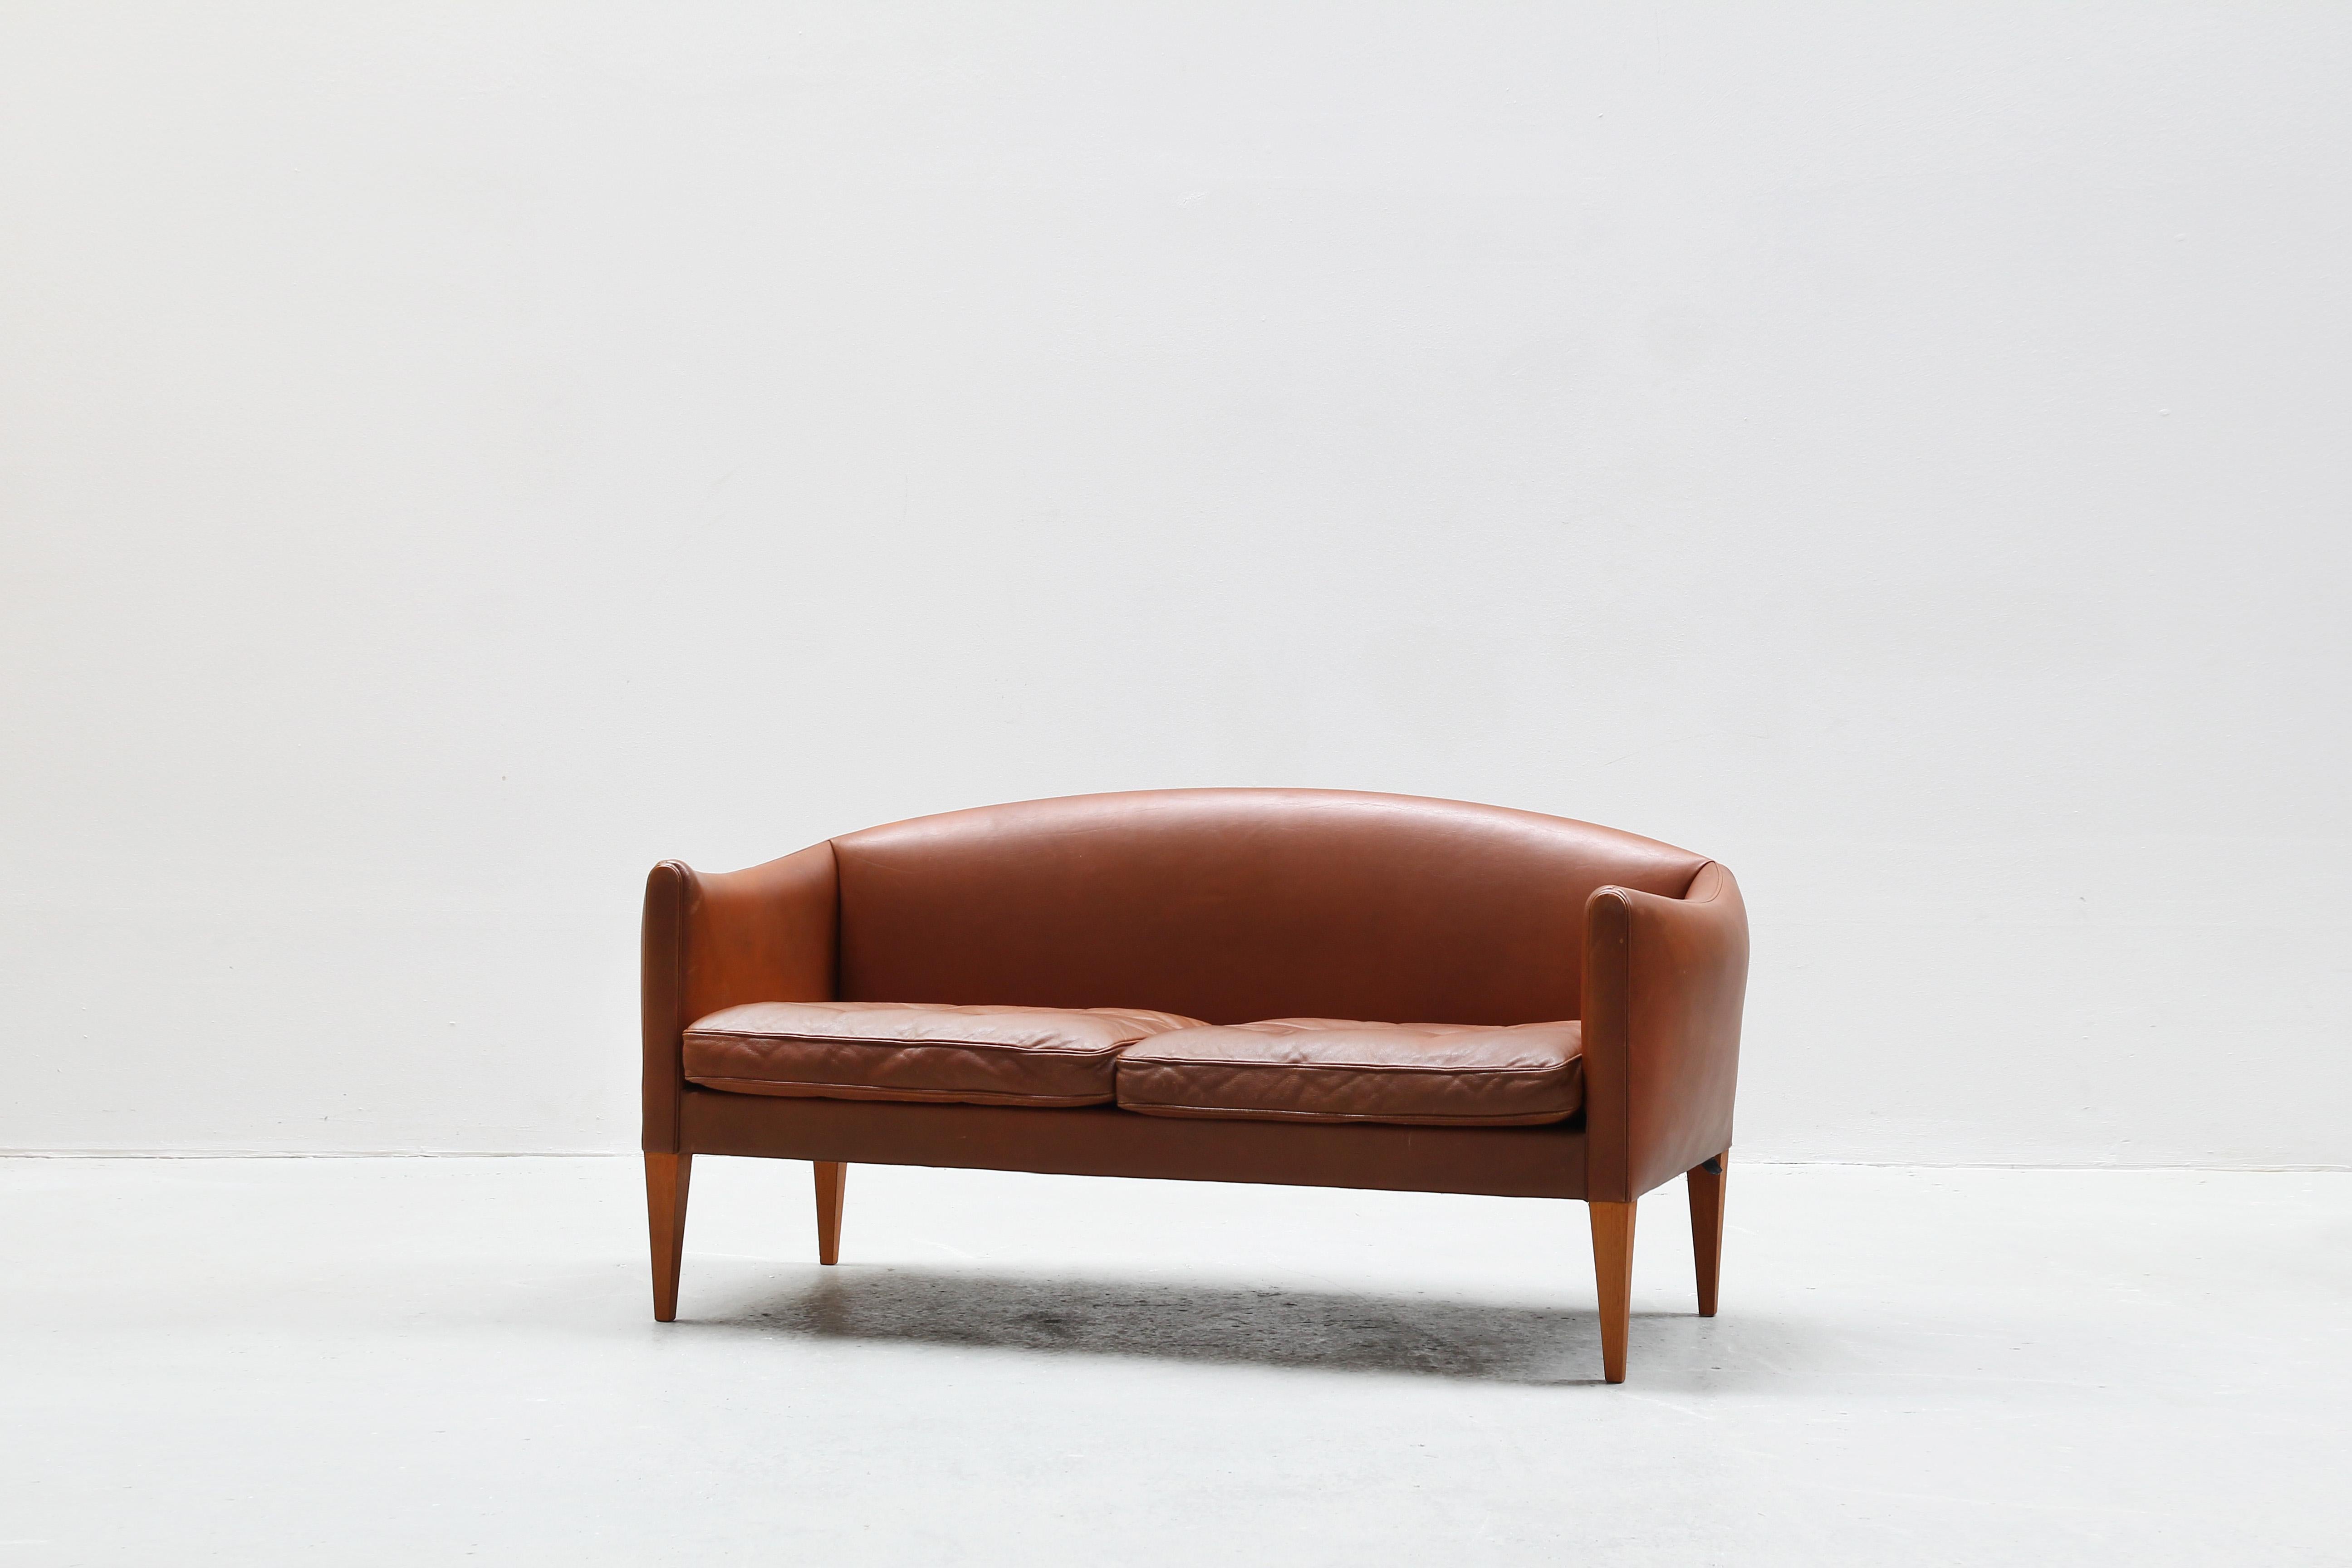 Very beautiful two-seat sofa designed by Illum Wikkelsø and produced by Holger Christiansen in the 1960s in Denmark.
The sofa is in an great original condition with just little traces of usage.